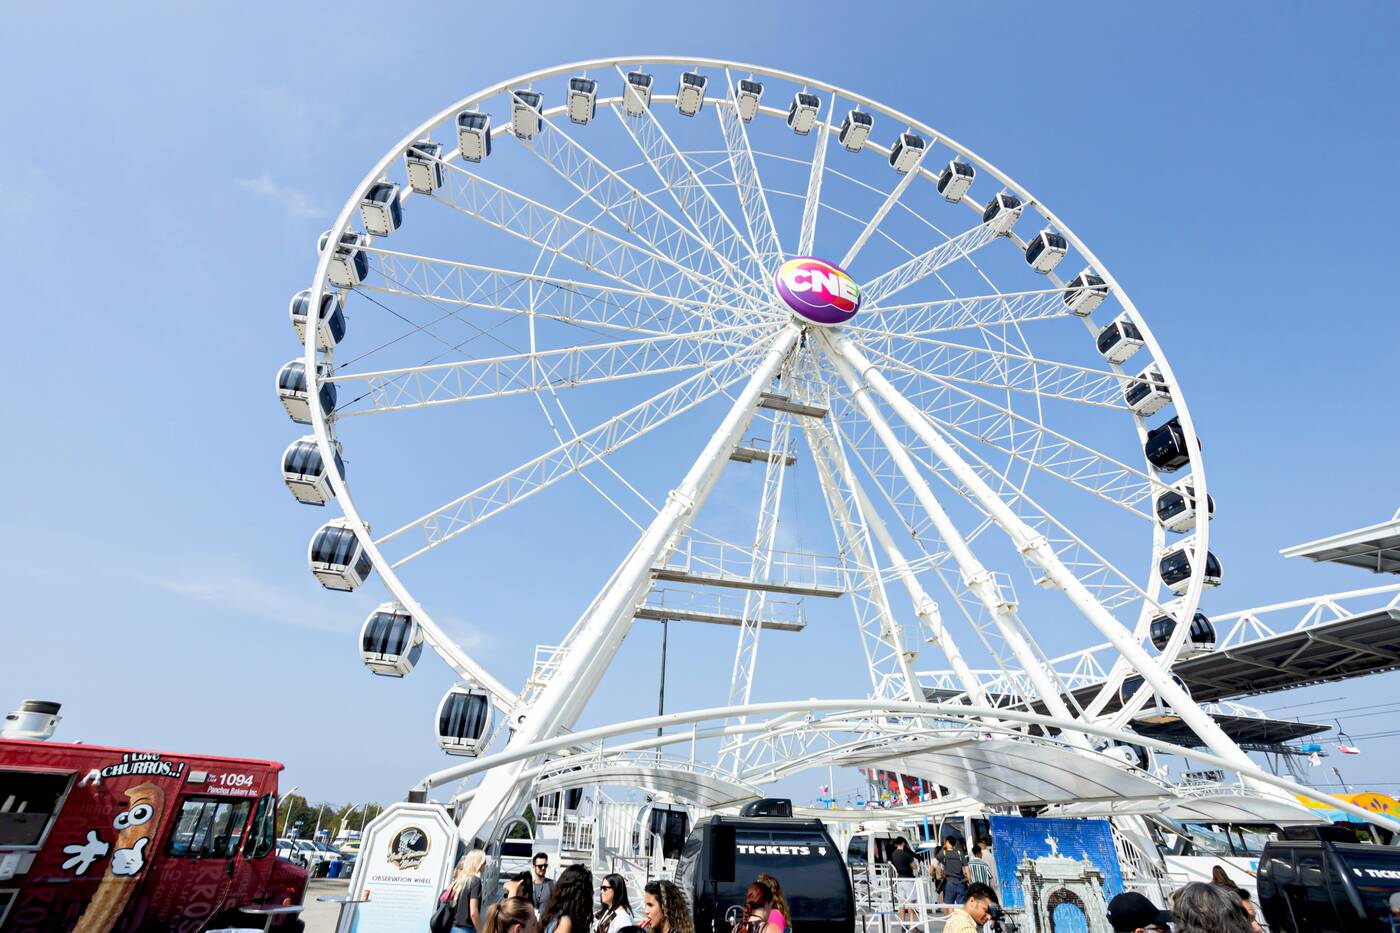 Here's an exclusive sneak peek of the 2023 CNE in Toronto